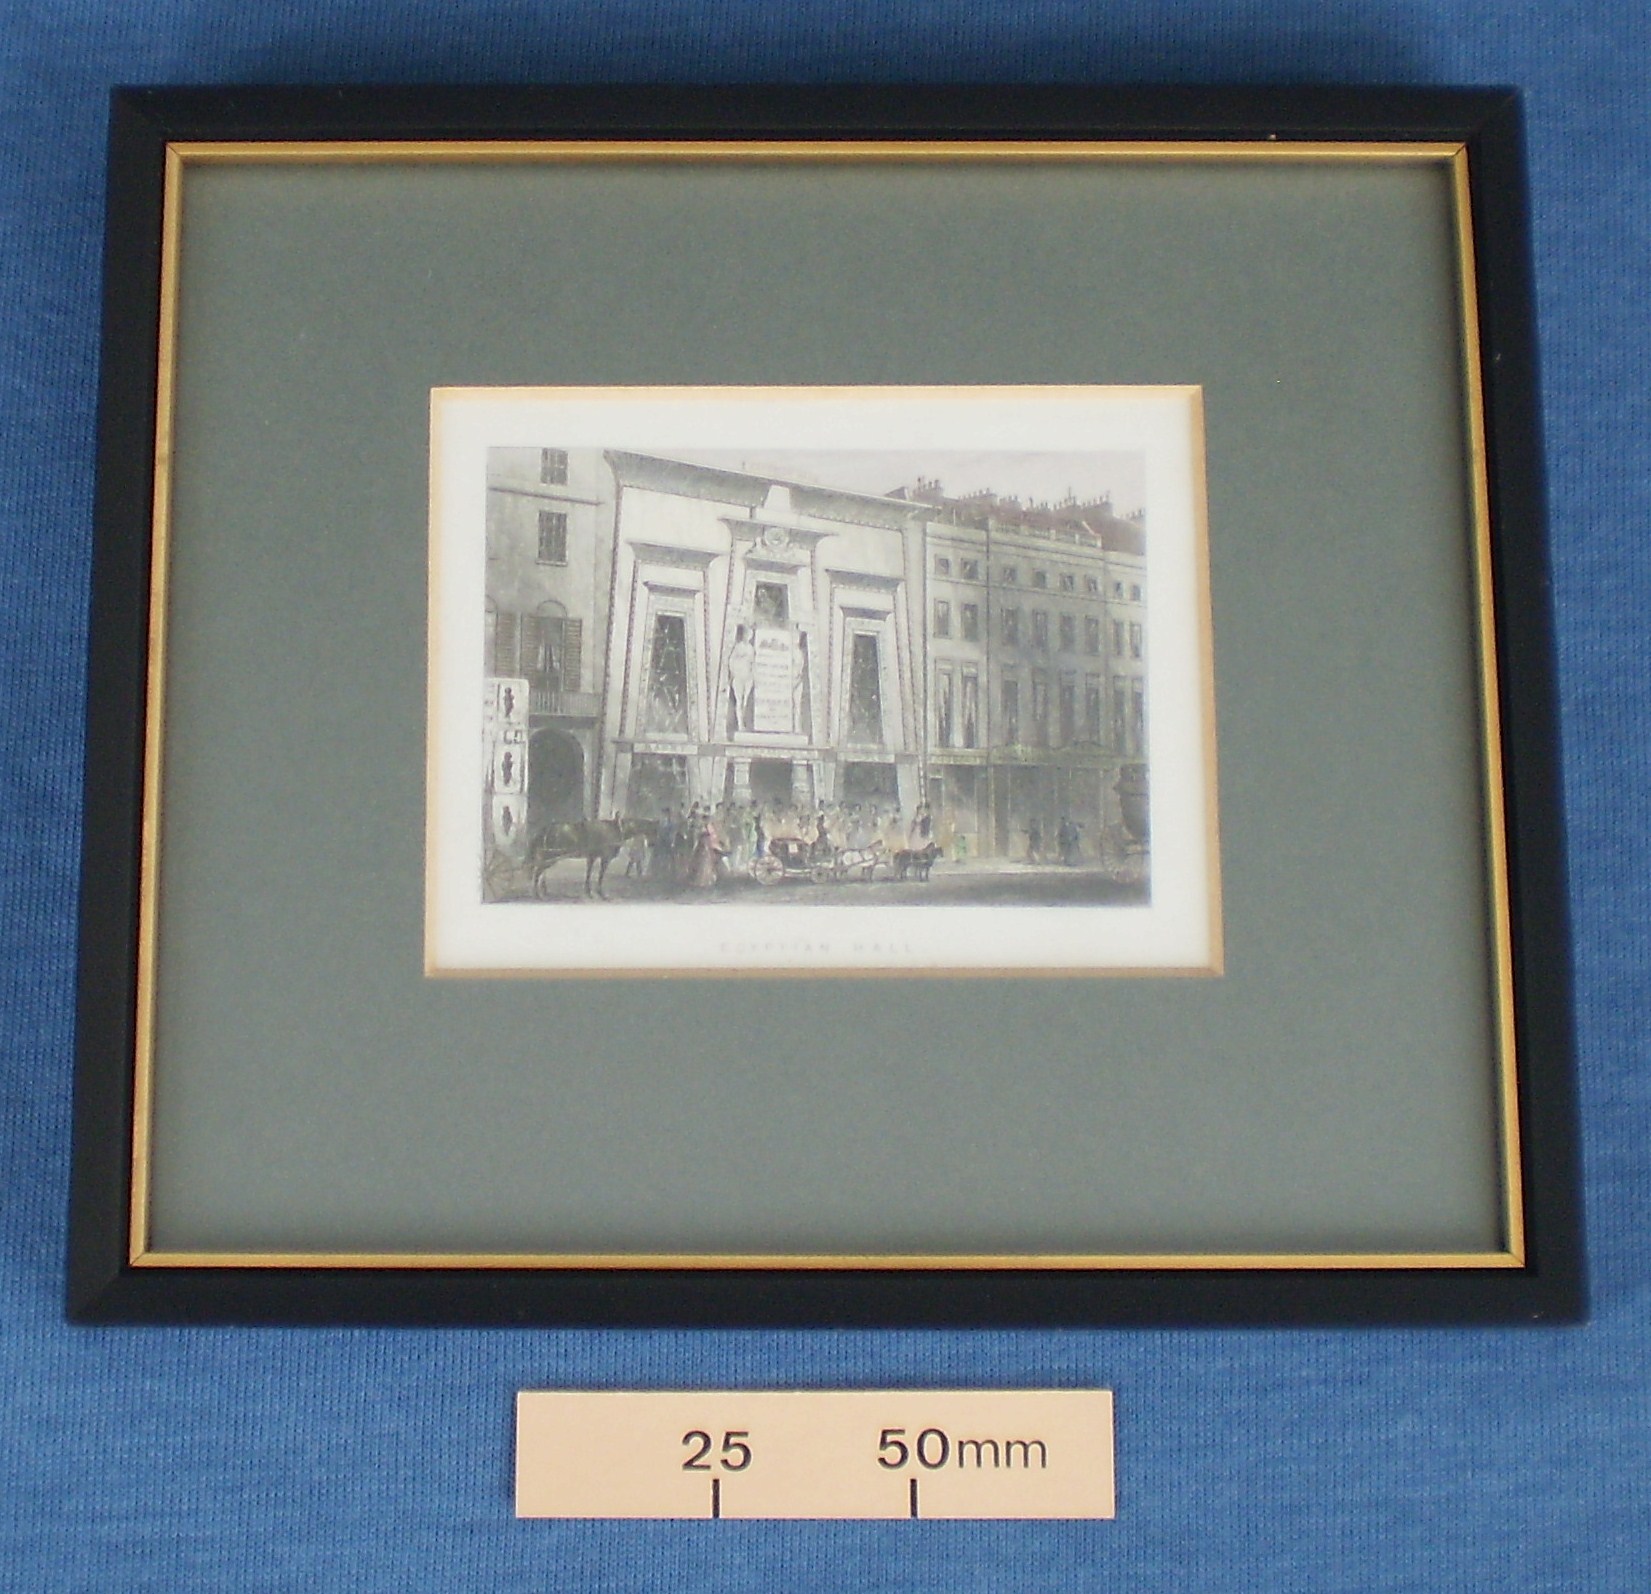 Framed hand tinted print of the Egyptian Hall (Bullock’s Museum) on Piccadilly, London